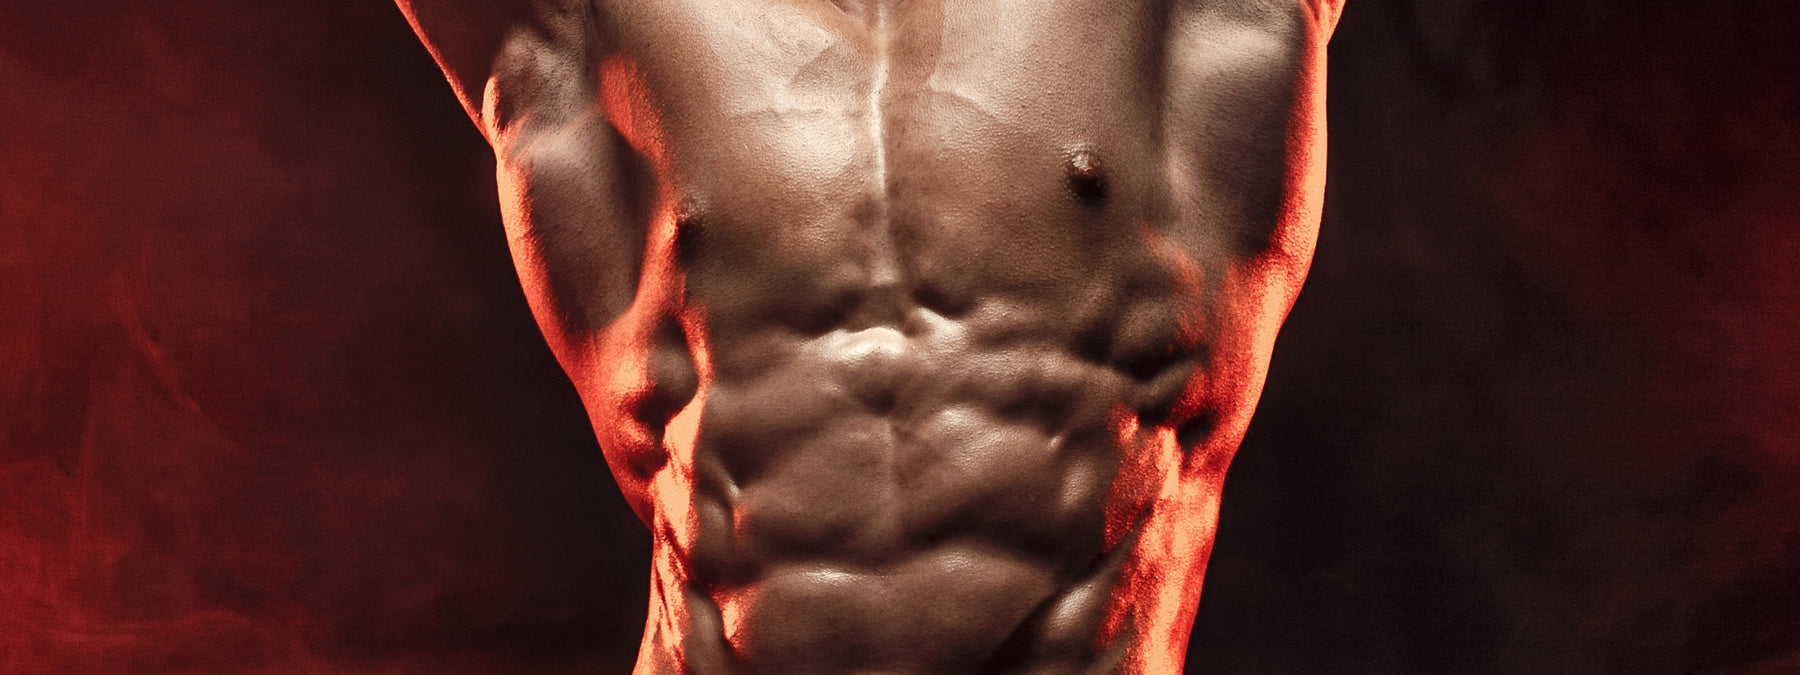 How to Get Shredded By Summer